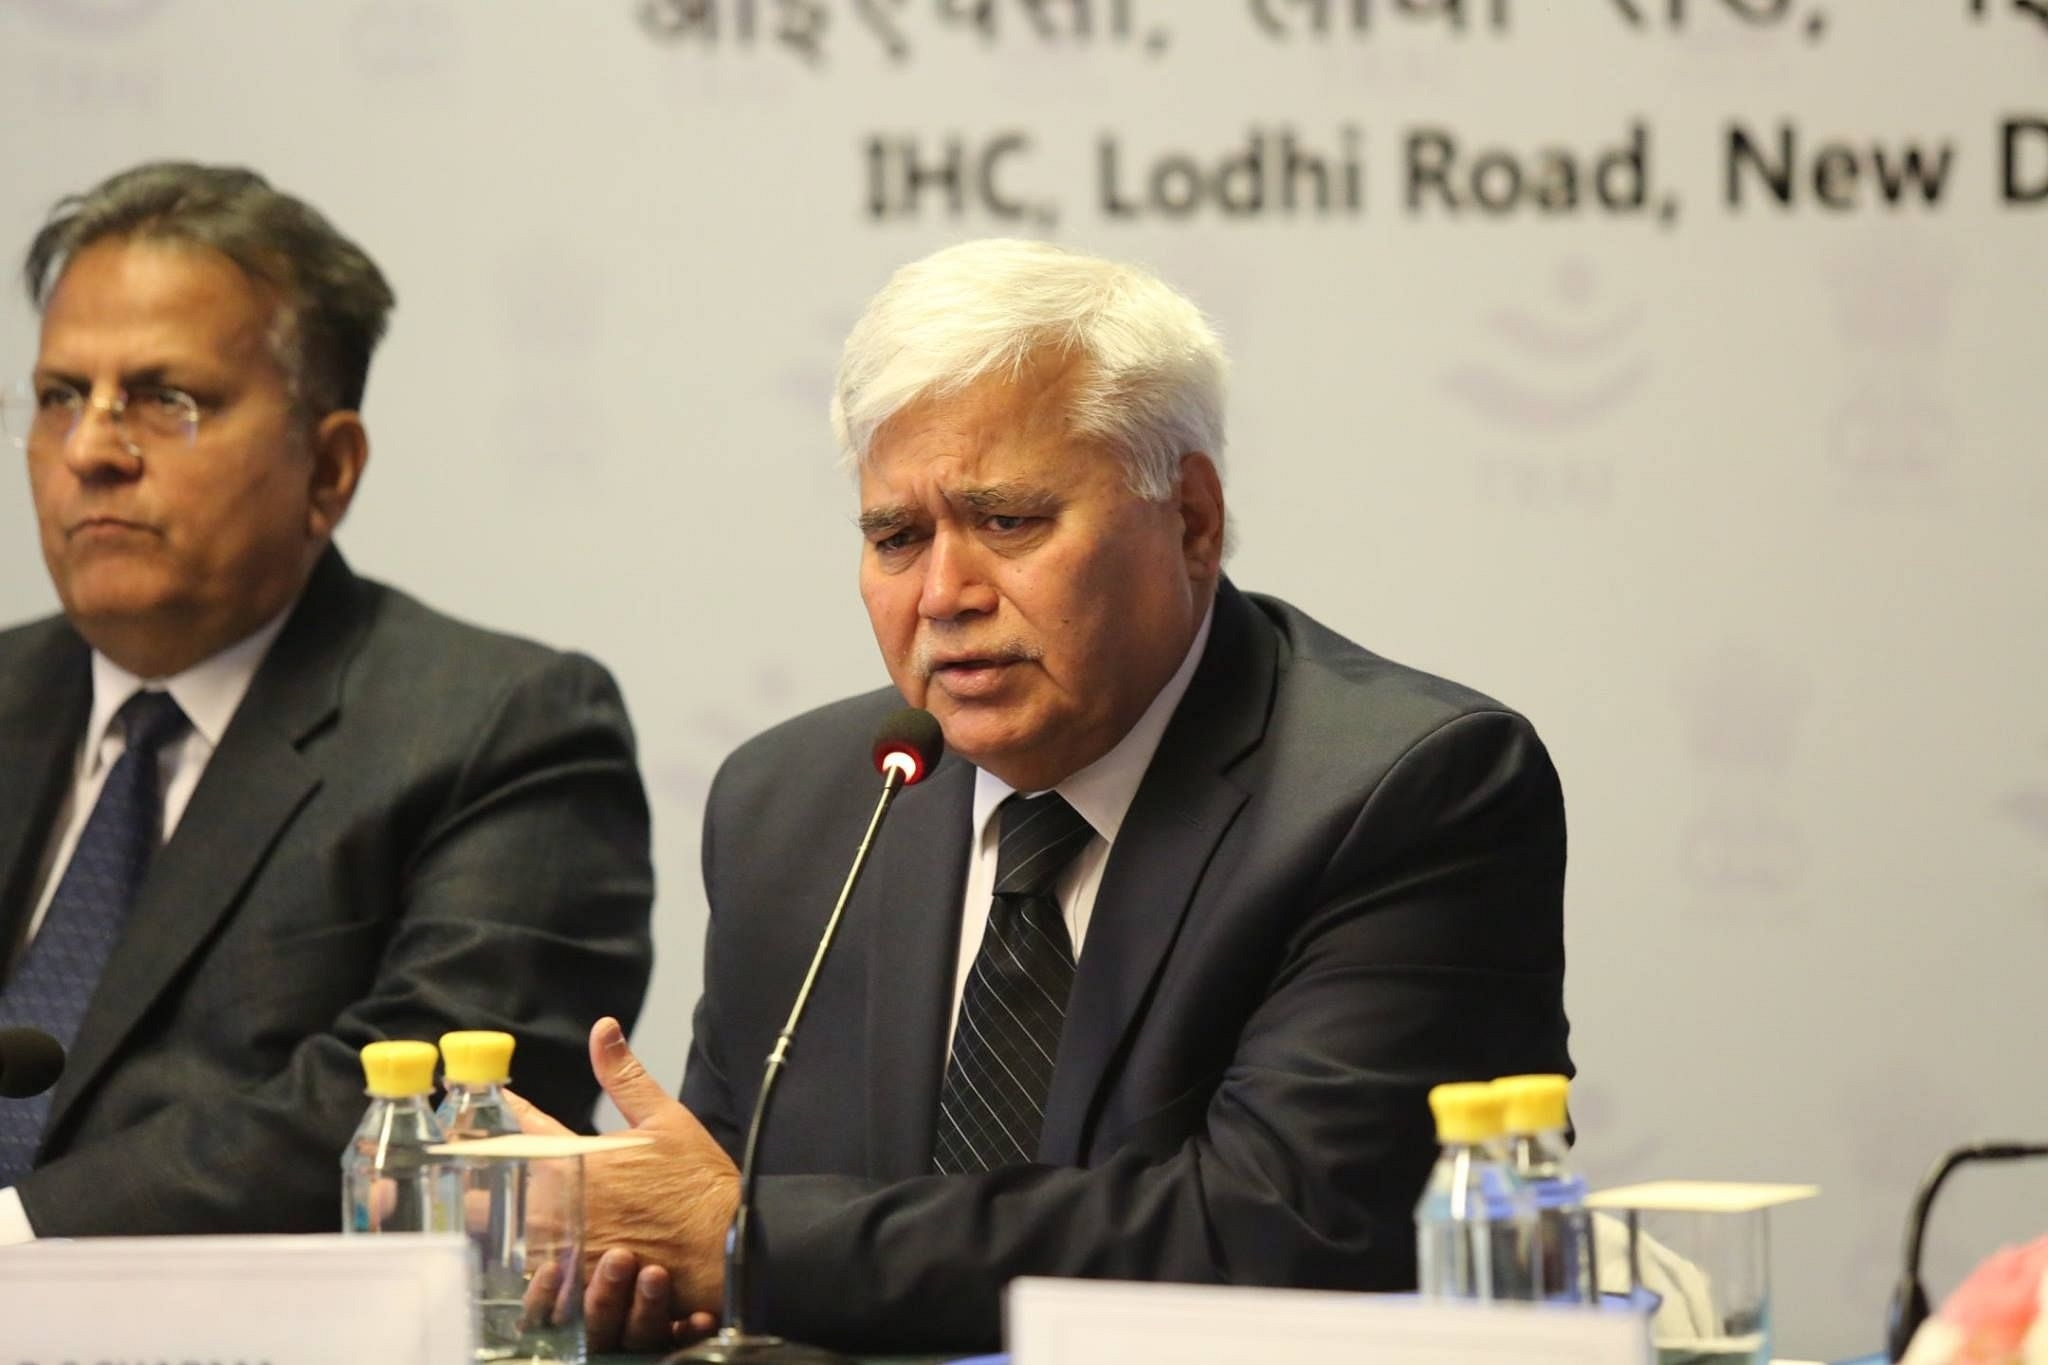 Chairman of TRAI, RS Sharma said that the body had recommended many measures to lower the levies on the sector and help to improve the operator’s financial health. (image via Facebook/TRAI -Telecom Regulatory Authority of India)